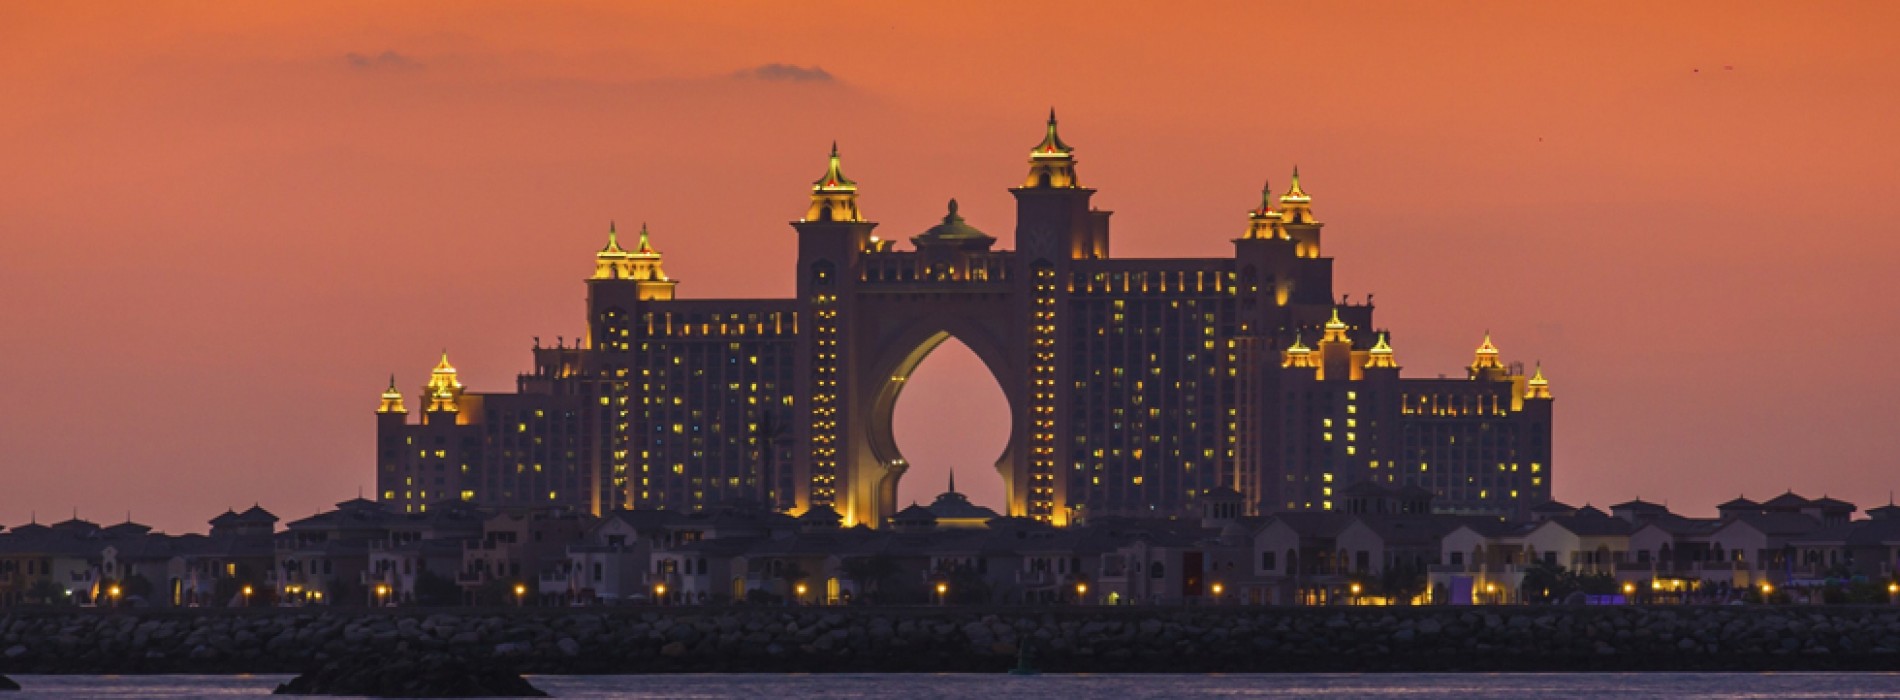 Experience global culinary delights at Atlantis, The Palm with your staycation this summer